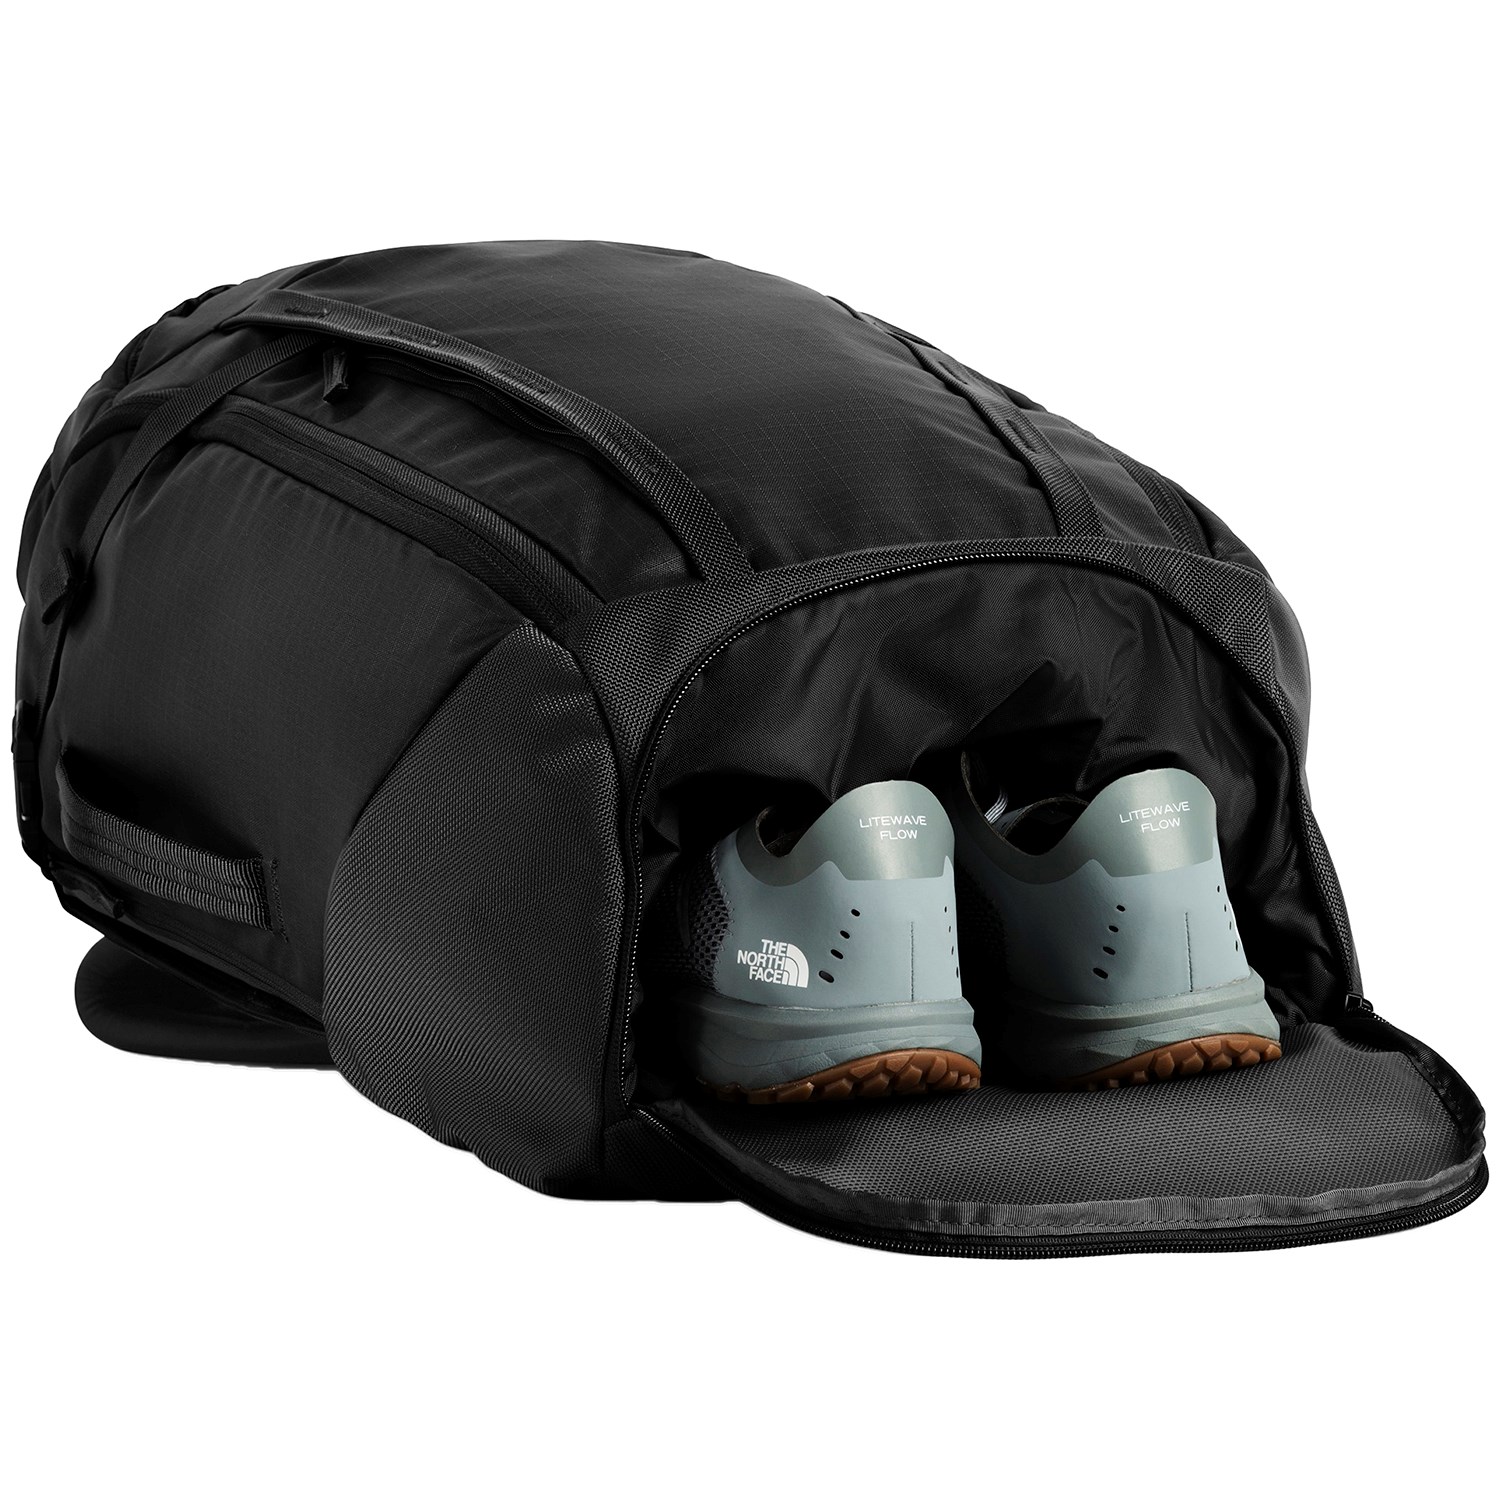 north face stratoliner travel pack